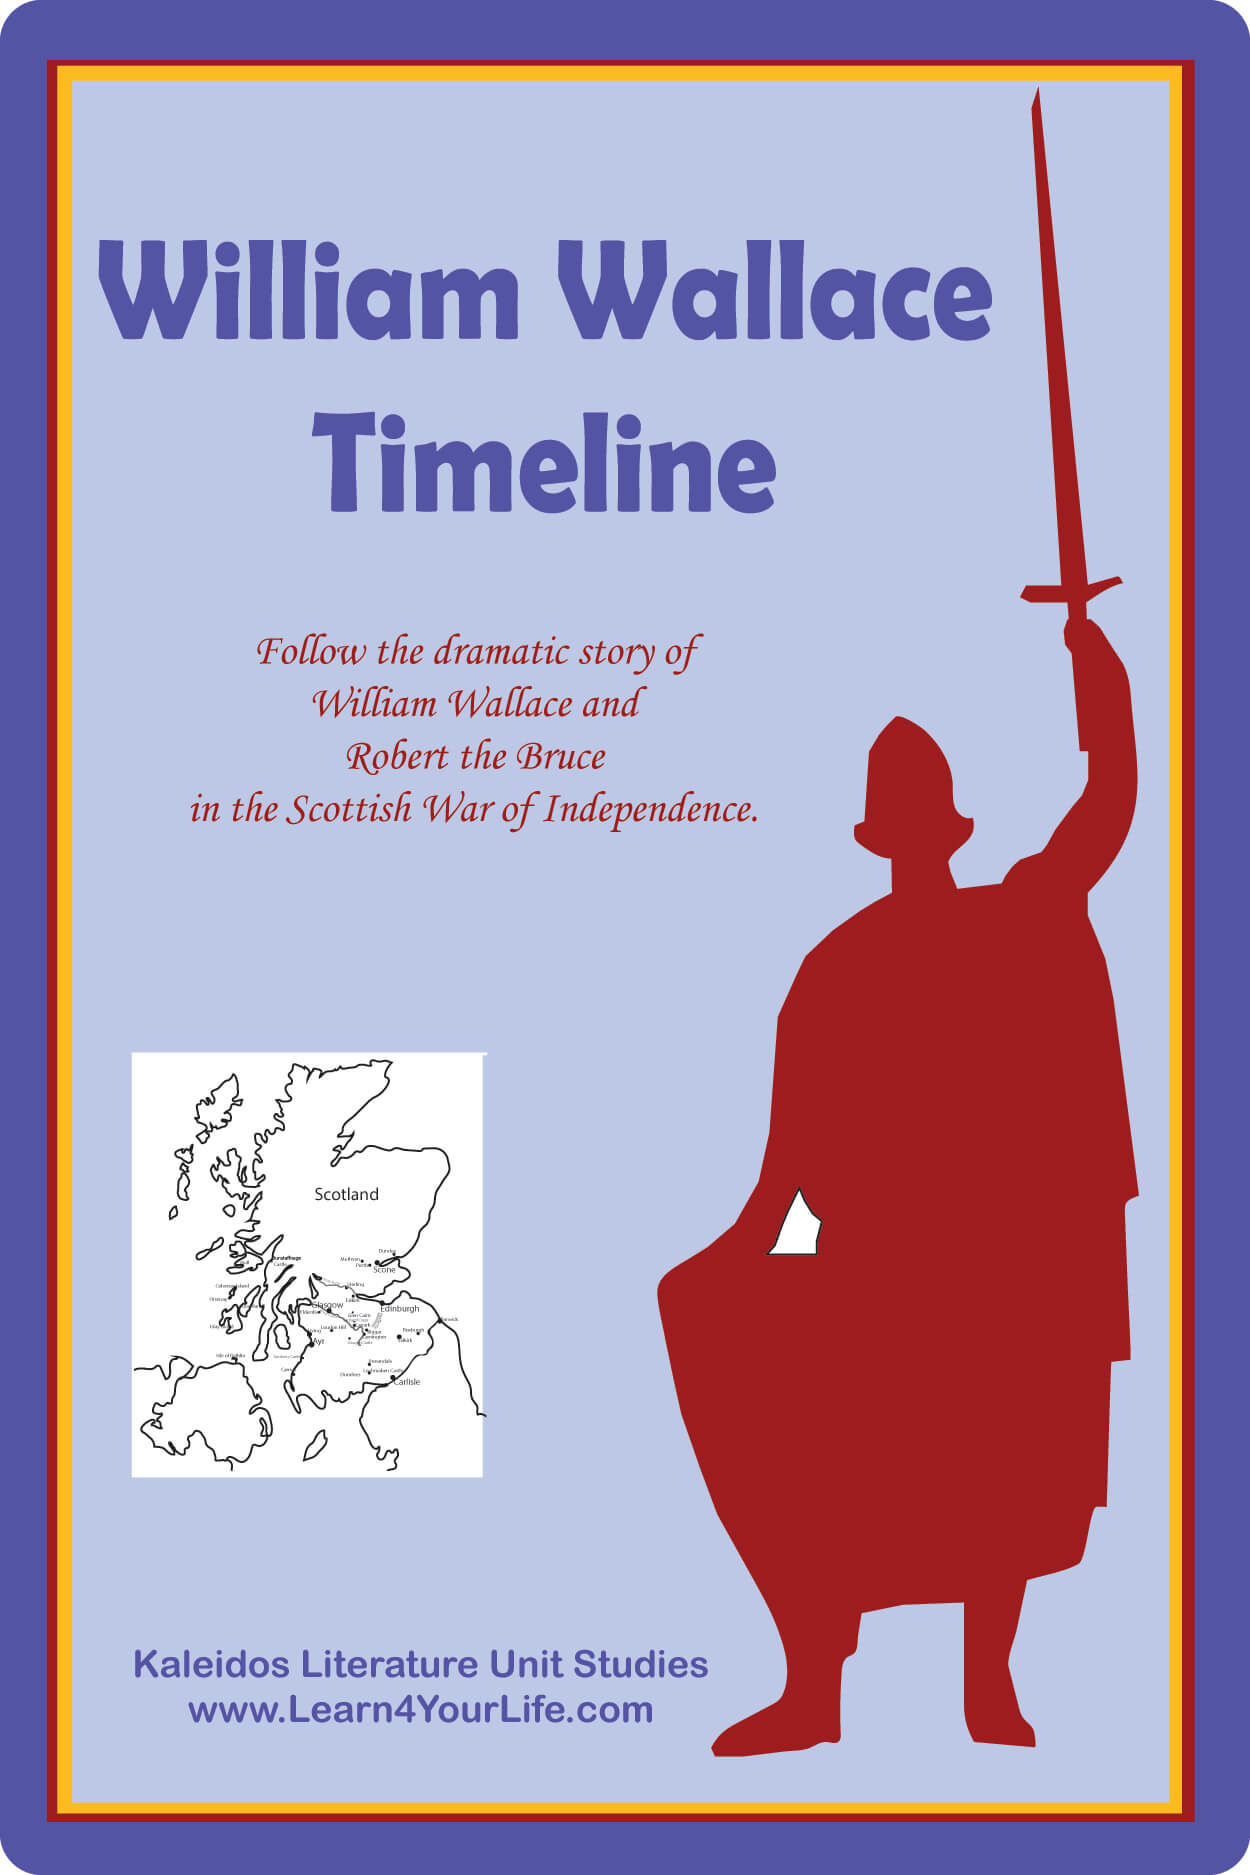 William Walllace and Robert Bruce Timeline